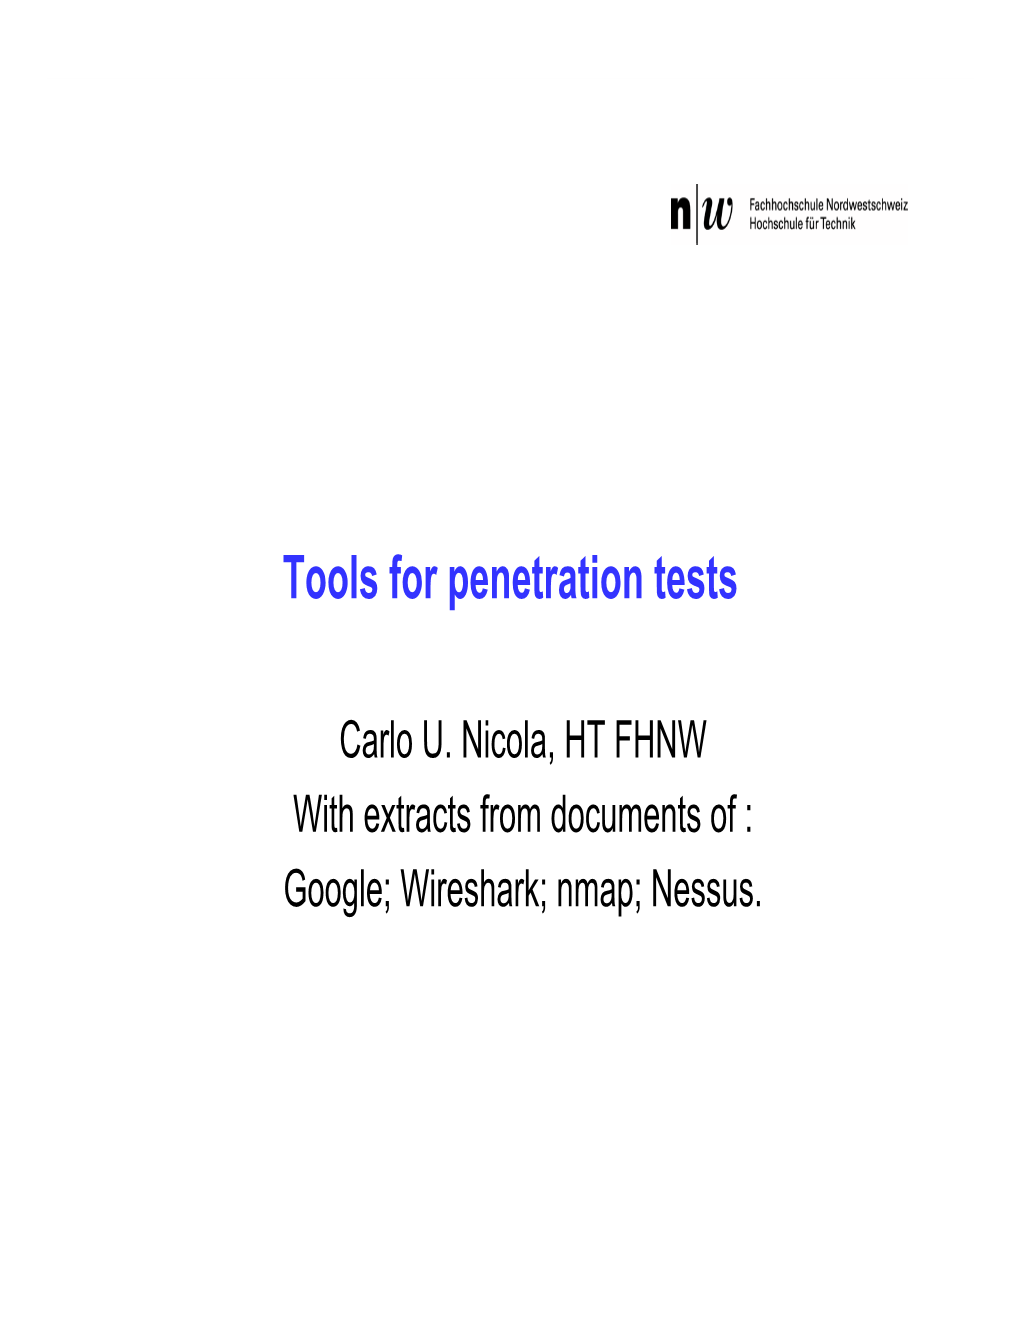 Tools for Penetration Tests